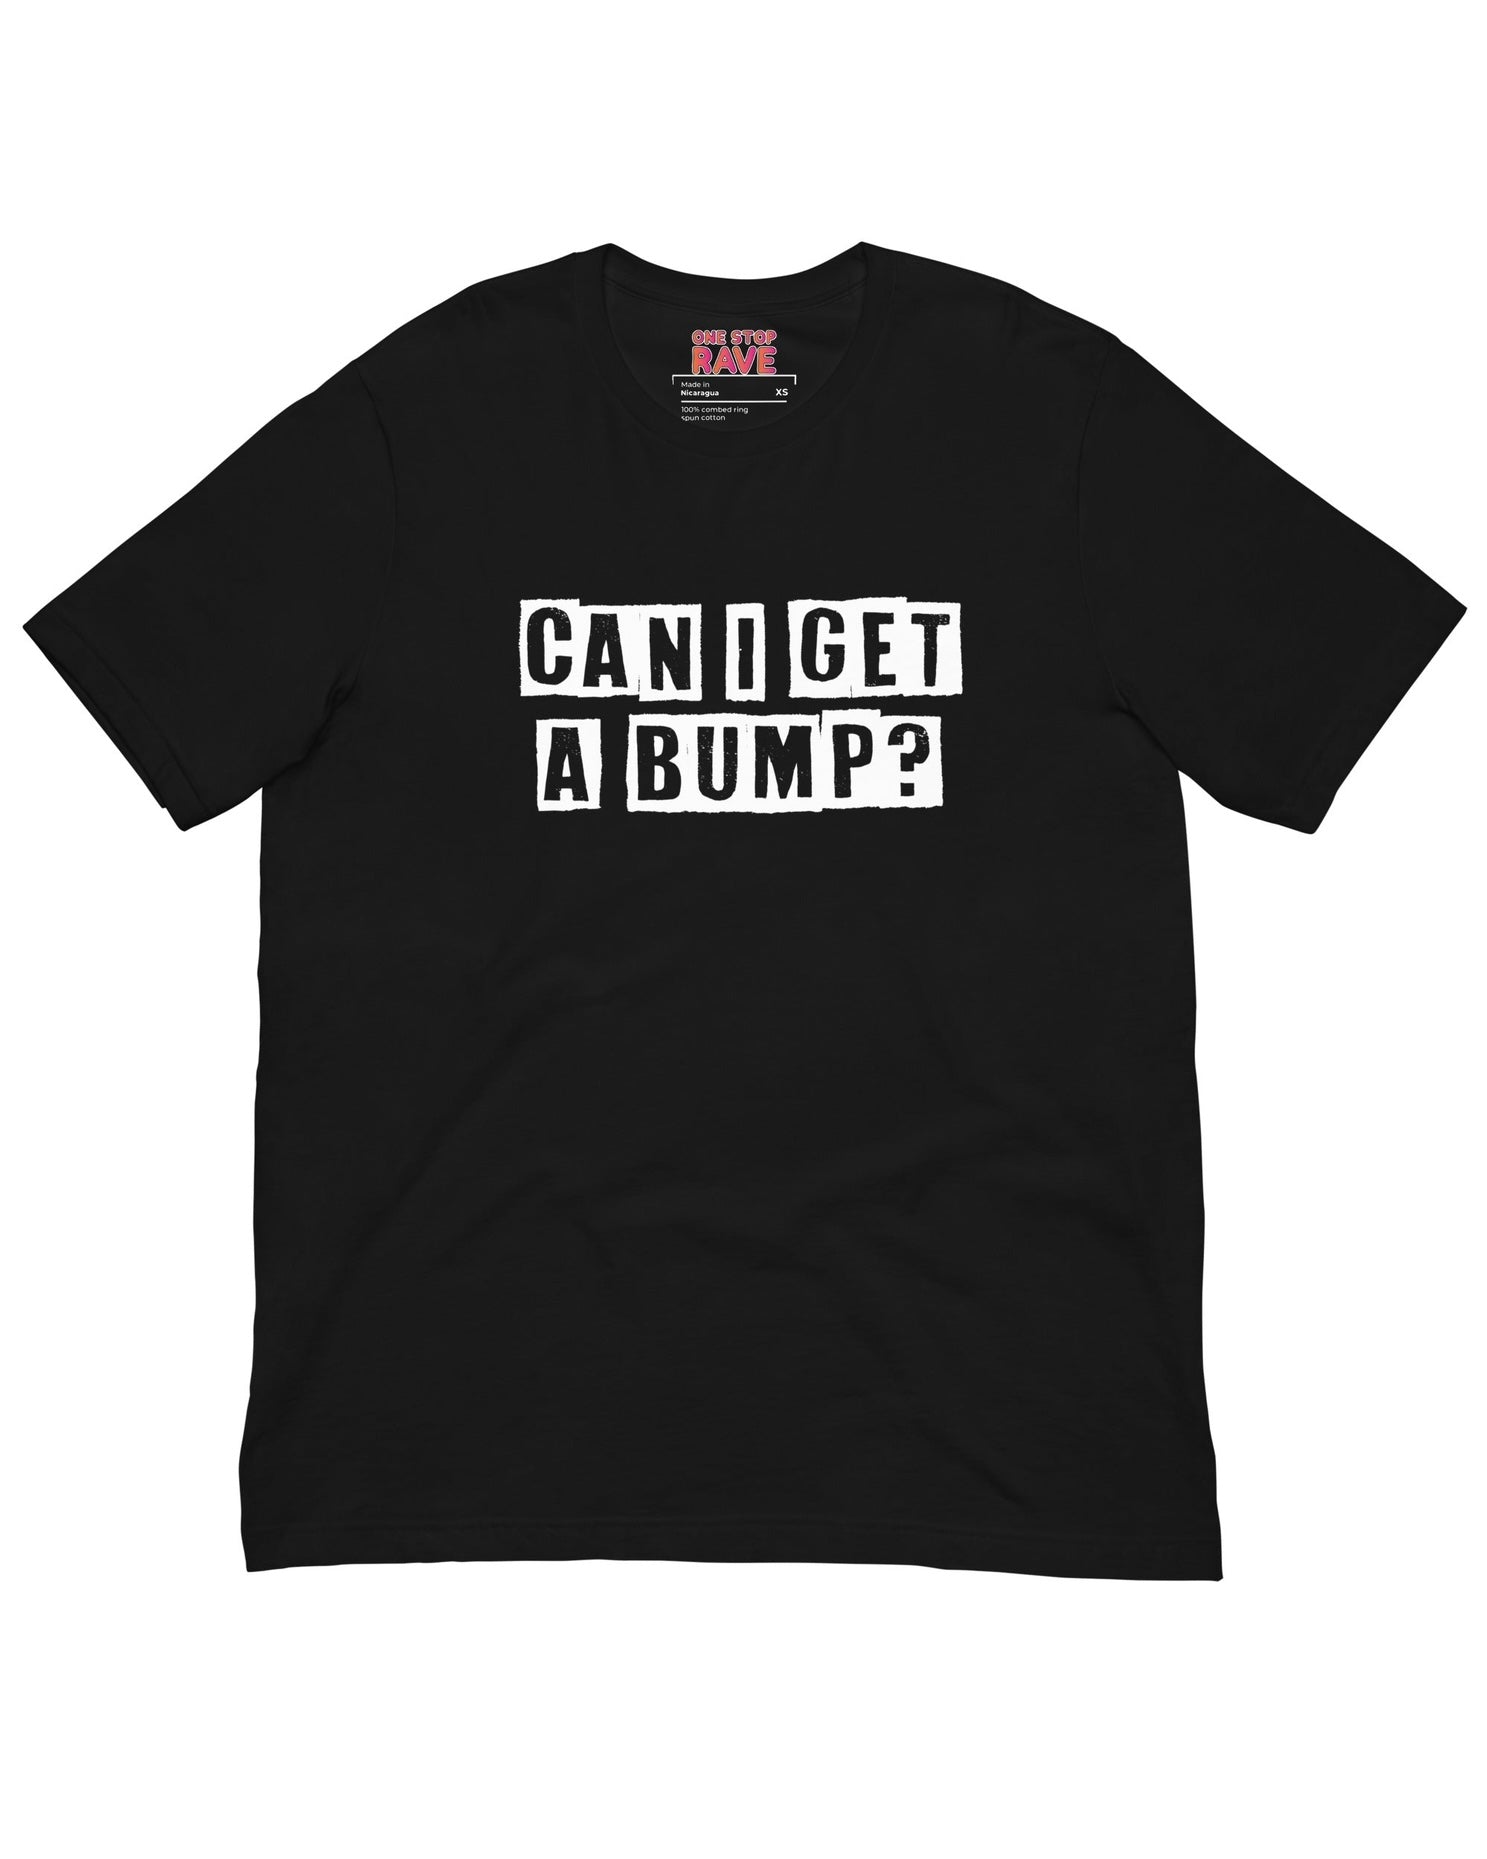 Black T-Shirt with the phrase "CAN I GET A BUMP?" & OSR label.